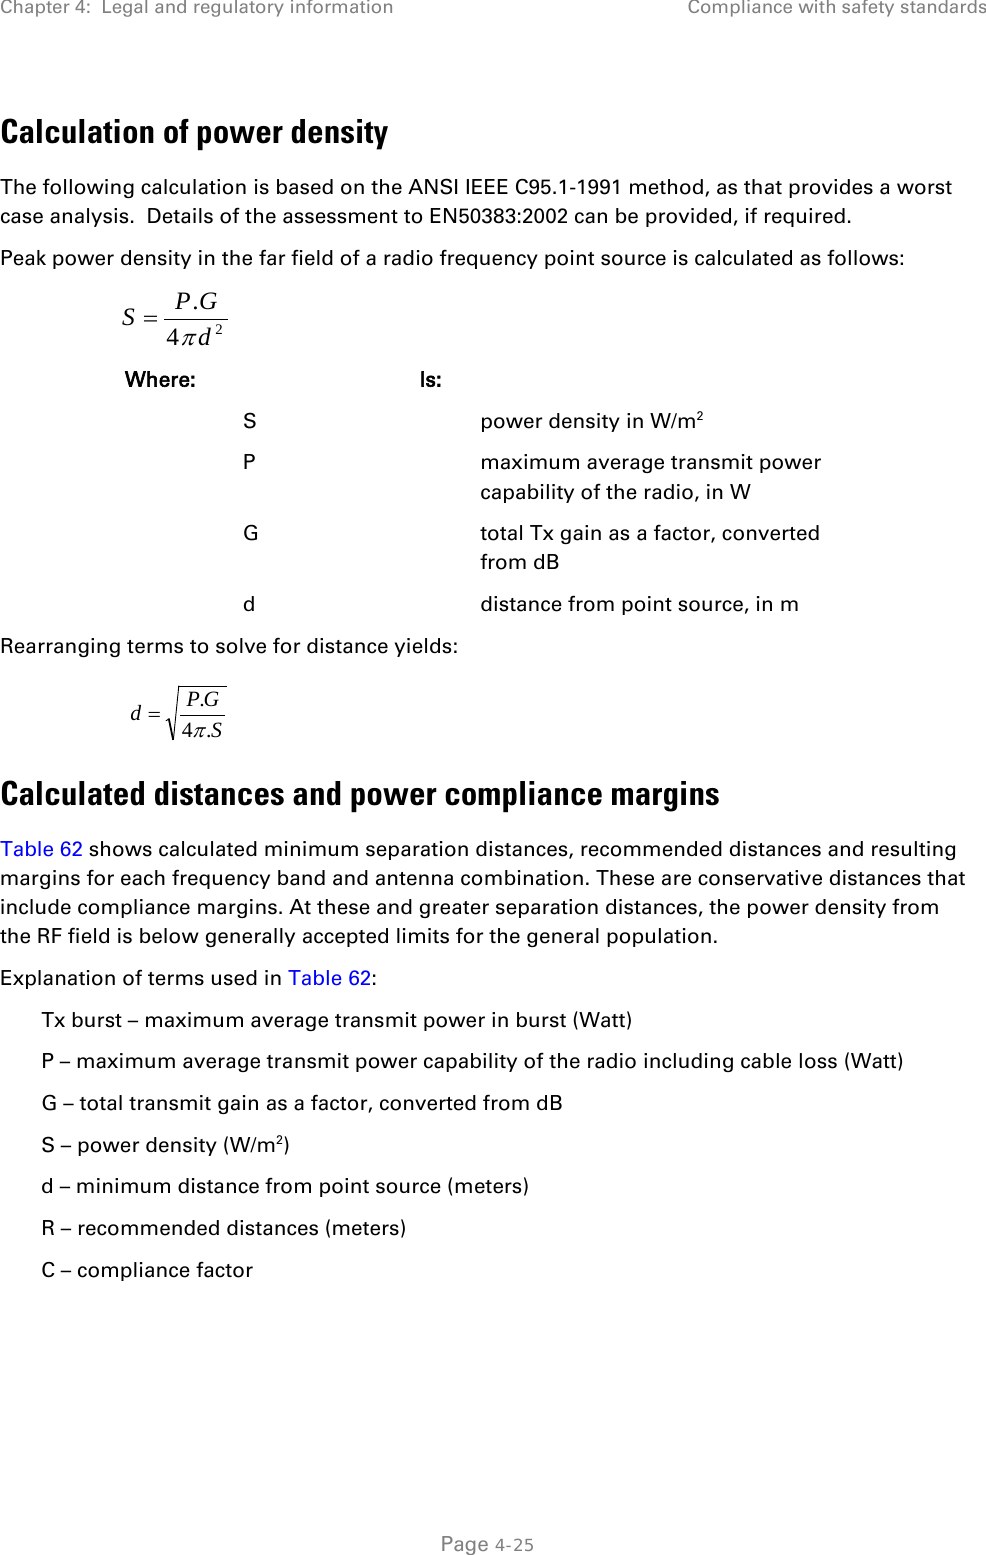 Chapter 4:  Legal and regulatory information Compliance with safety standards  Calculation of power density The following calculation is based on the ANSI IEEE C95.1-1991 method, as that provides a worst case analysis.  Details of the assessment to EN50383:2002 can be provided, if required. Peak power density in the far field of a radio frequency point source is calculated as follows:   Where:  Is:    S    power density in W/m2   P    maximum average transmit power capability of the radio, in W   G    total Tx gain as a factor, converted from dB   d    distance from point source, in m Rearranging terms to solve for distance yields:   Calculated distances and power compliance margins Table 62 shows calculated minimum separation distances, recommended distances and resulting margins for each frequency band and antenna combination. These are conservative distances that include compliance margins. At these and greater separation distances, the power density from the RF field is below generally accepted limits for the general population. Explanation of terms used in Table 62: Tx burst – maximum average transmit power in burst (Watt) P – maximum average transmit power capability of the radio including cable loss (Watt) G – total transmit gain as a factor, converted from dB S – power density (W/m2) d – minimum distance from point source (meters) R – recommended distances (meters) C – compliance factor   24.dGPSπ=SGPd.4.π= Page 4-25 